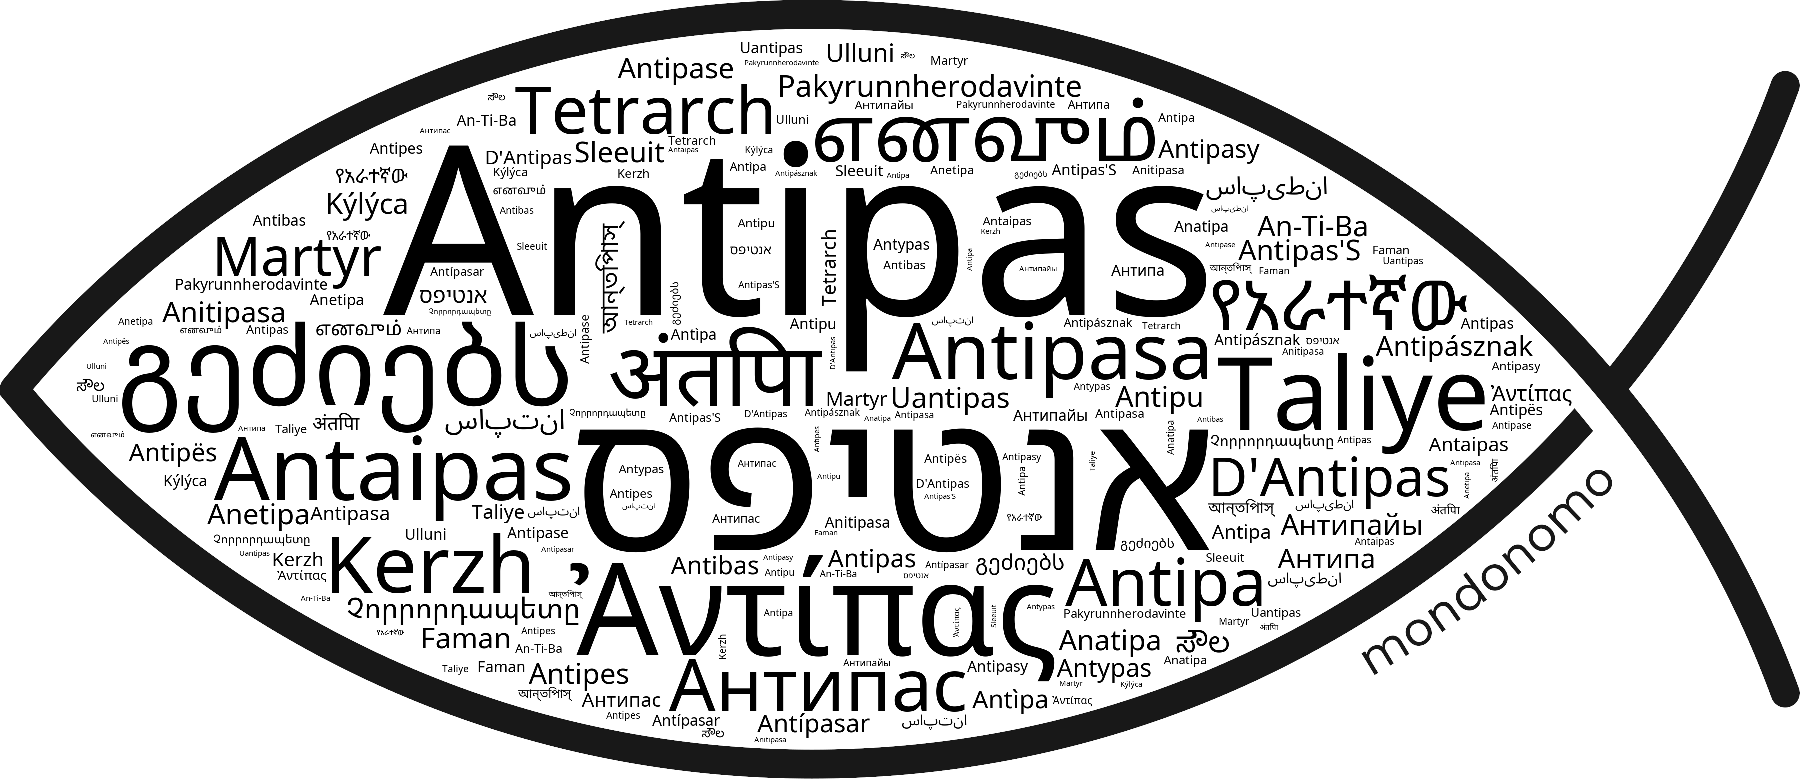 Name Antipas in the world's Bibles